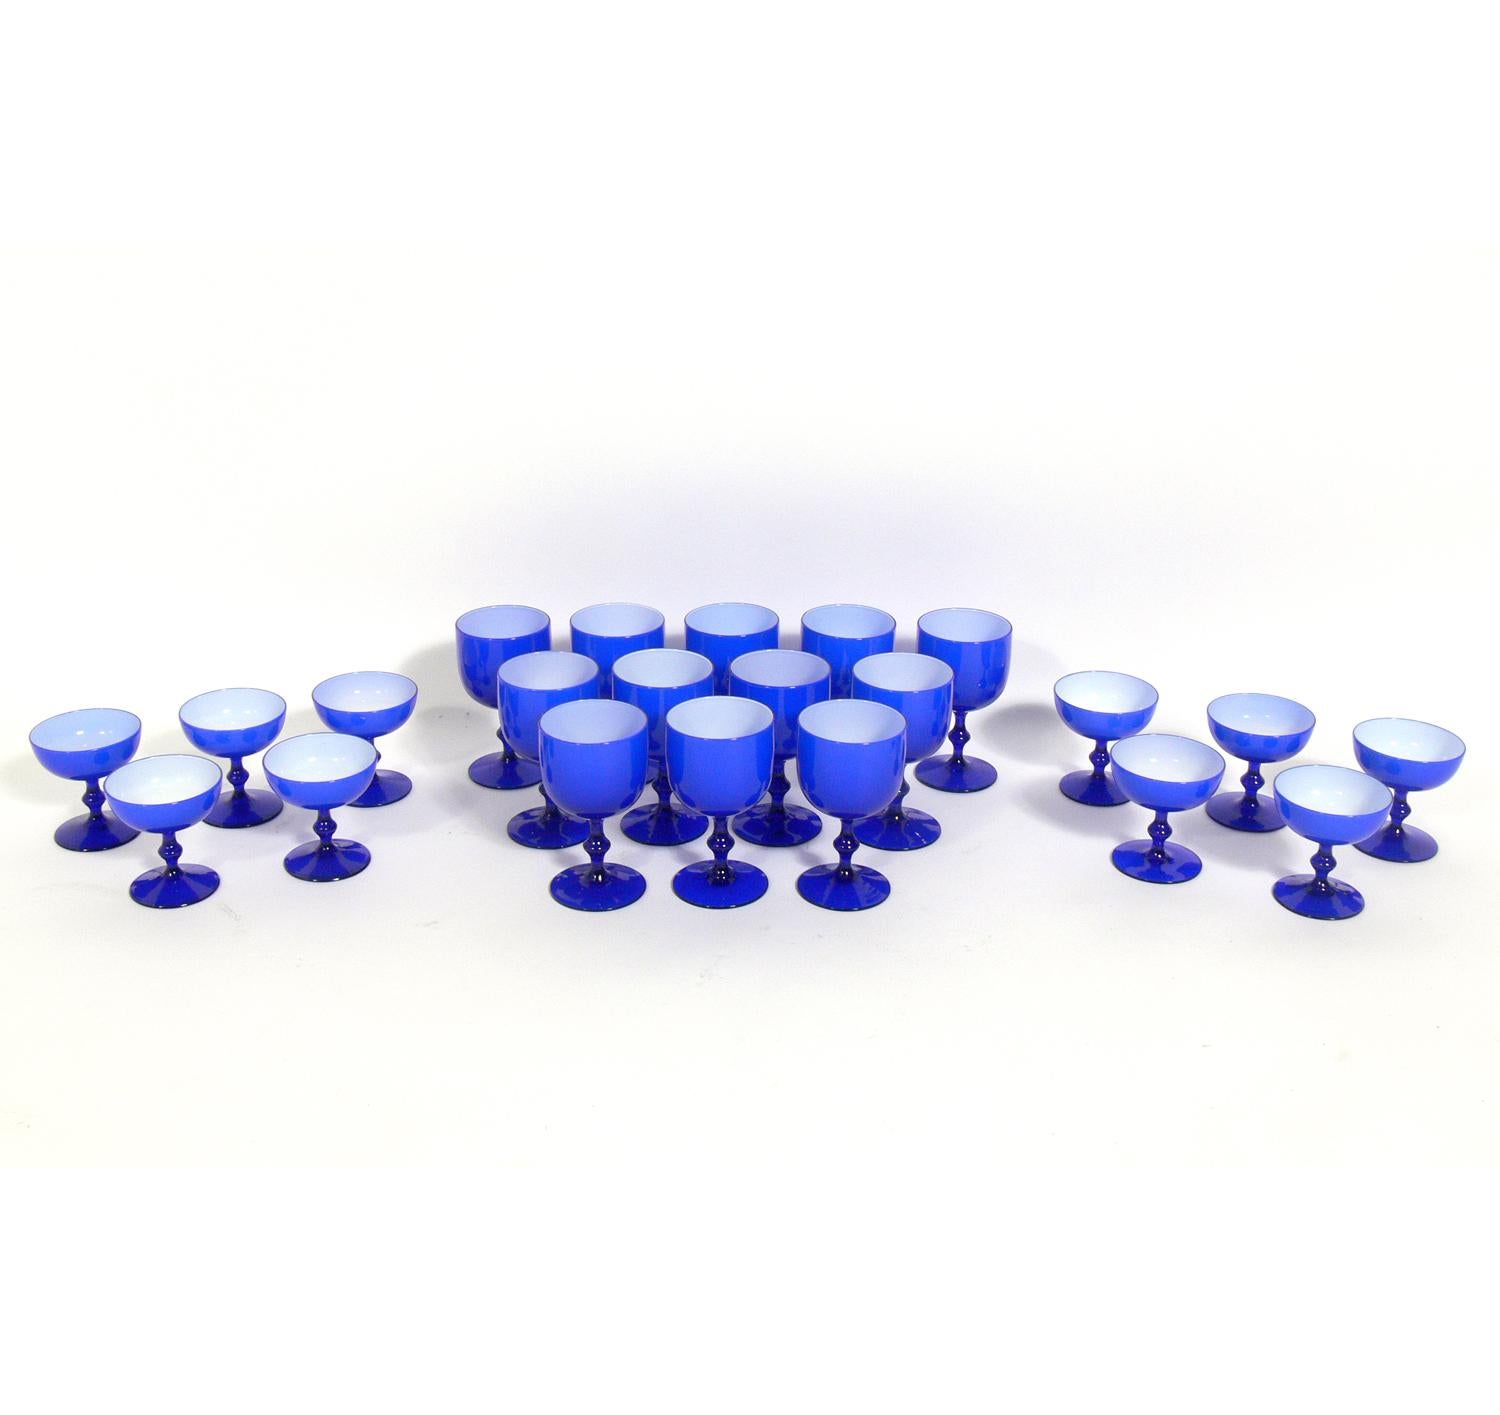 Vibrant set of cobalt blue glasses, designed by Carlo Moretti for Empoli, Italy, circa 1950s. The set consists of 22 glasses, 12 larger glasses measuring 5.75